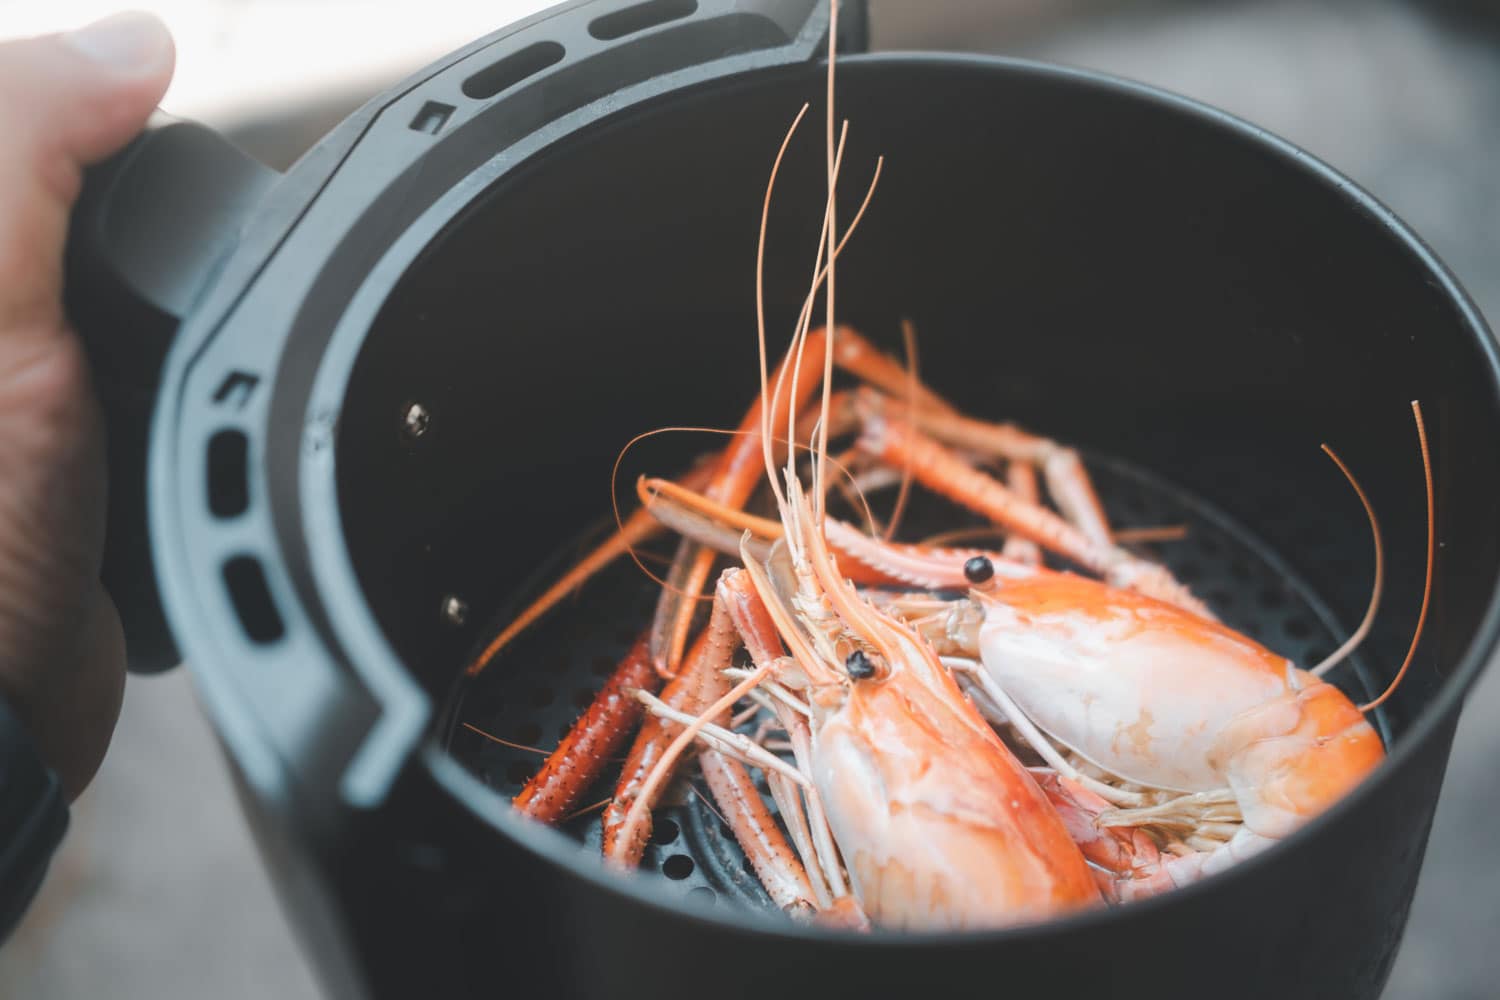 Boiling shrimp in the air fryer